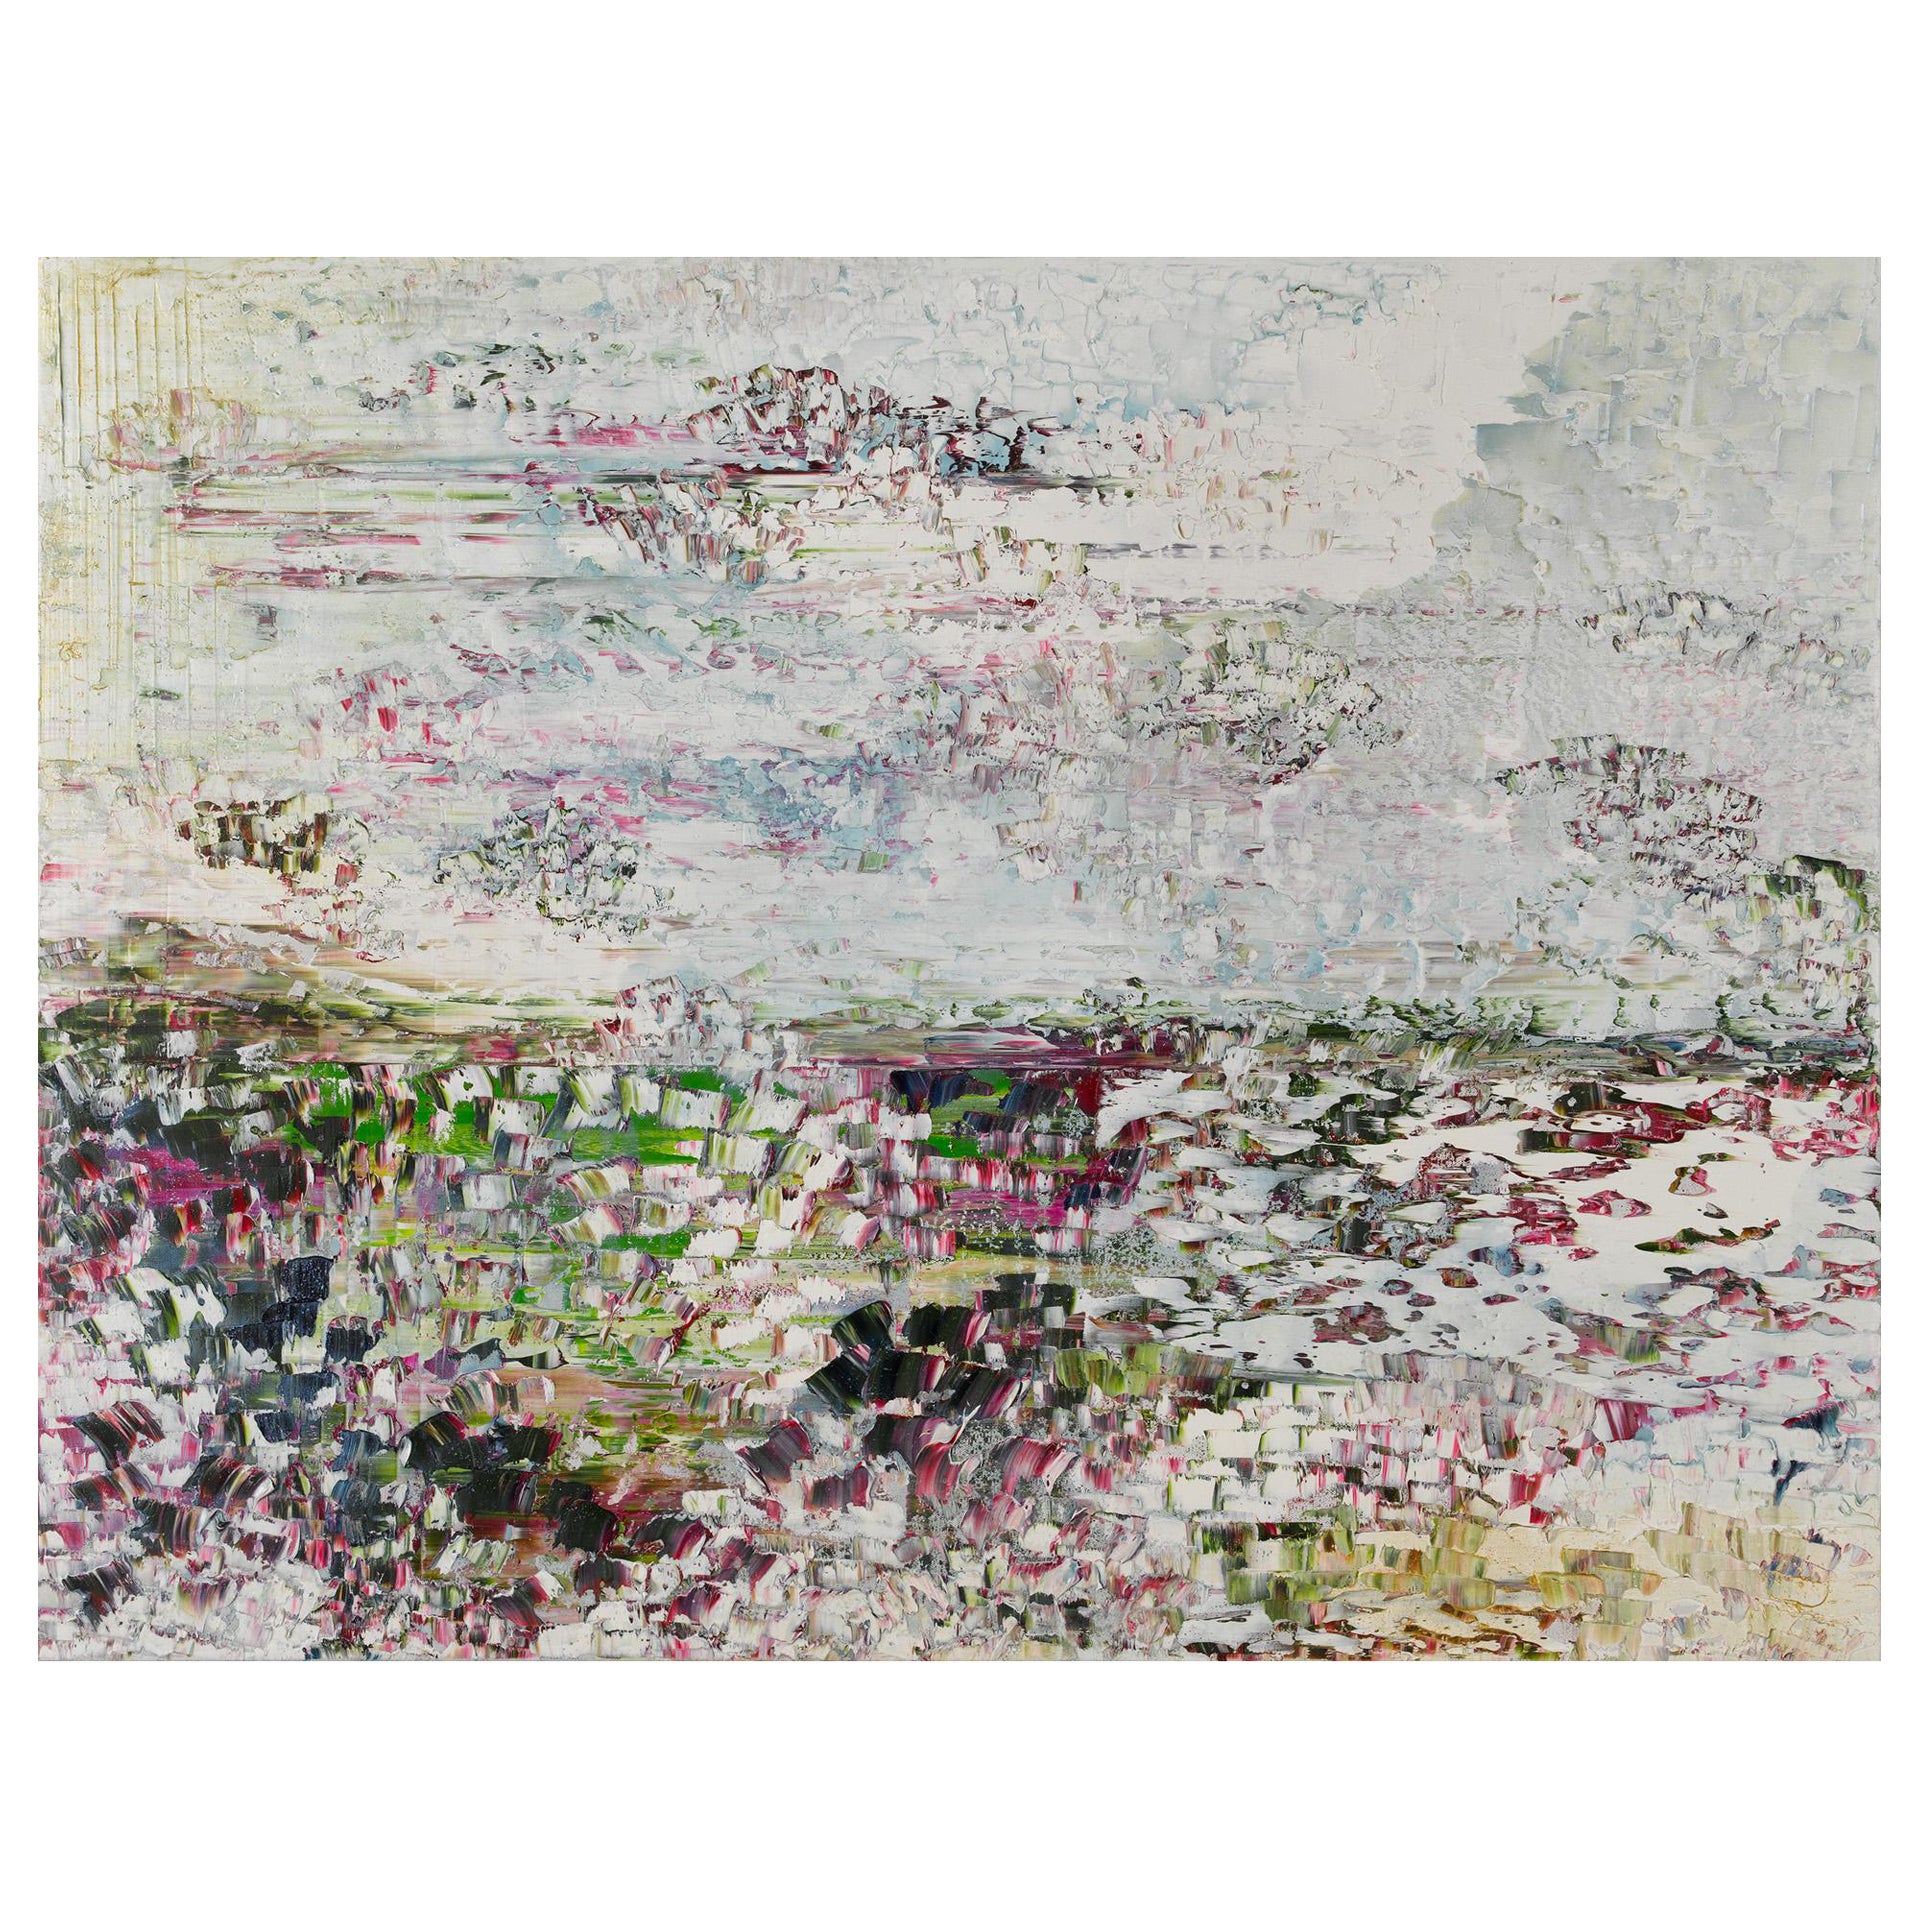 Contemporary painting of rosy shades that references the lily ponds of Monet